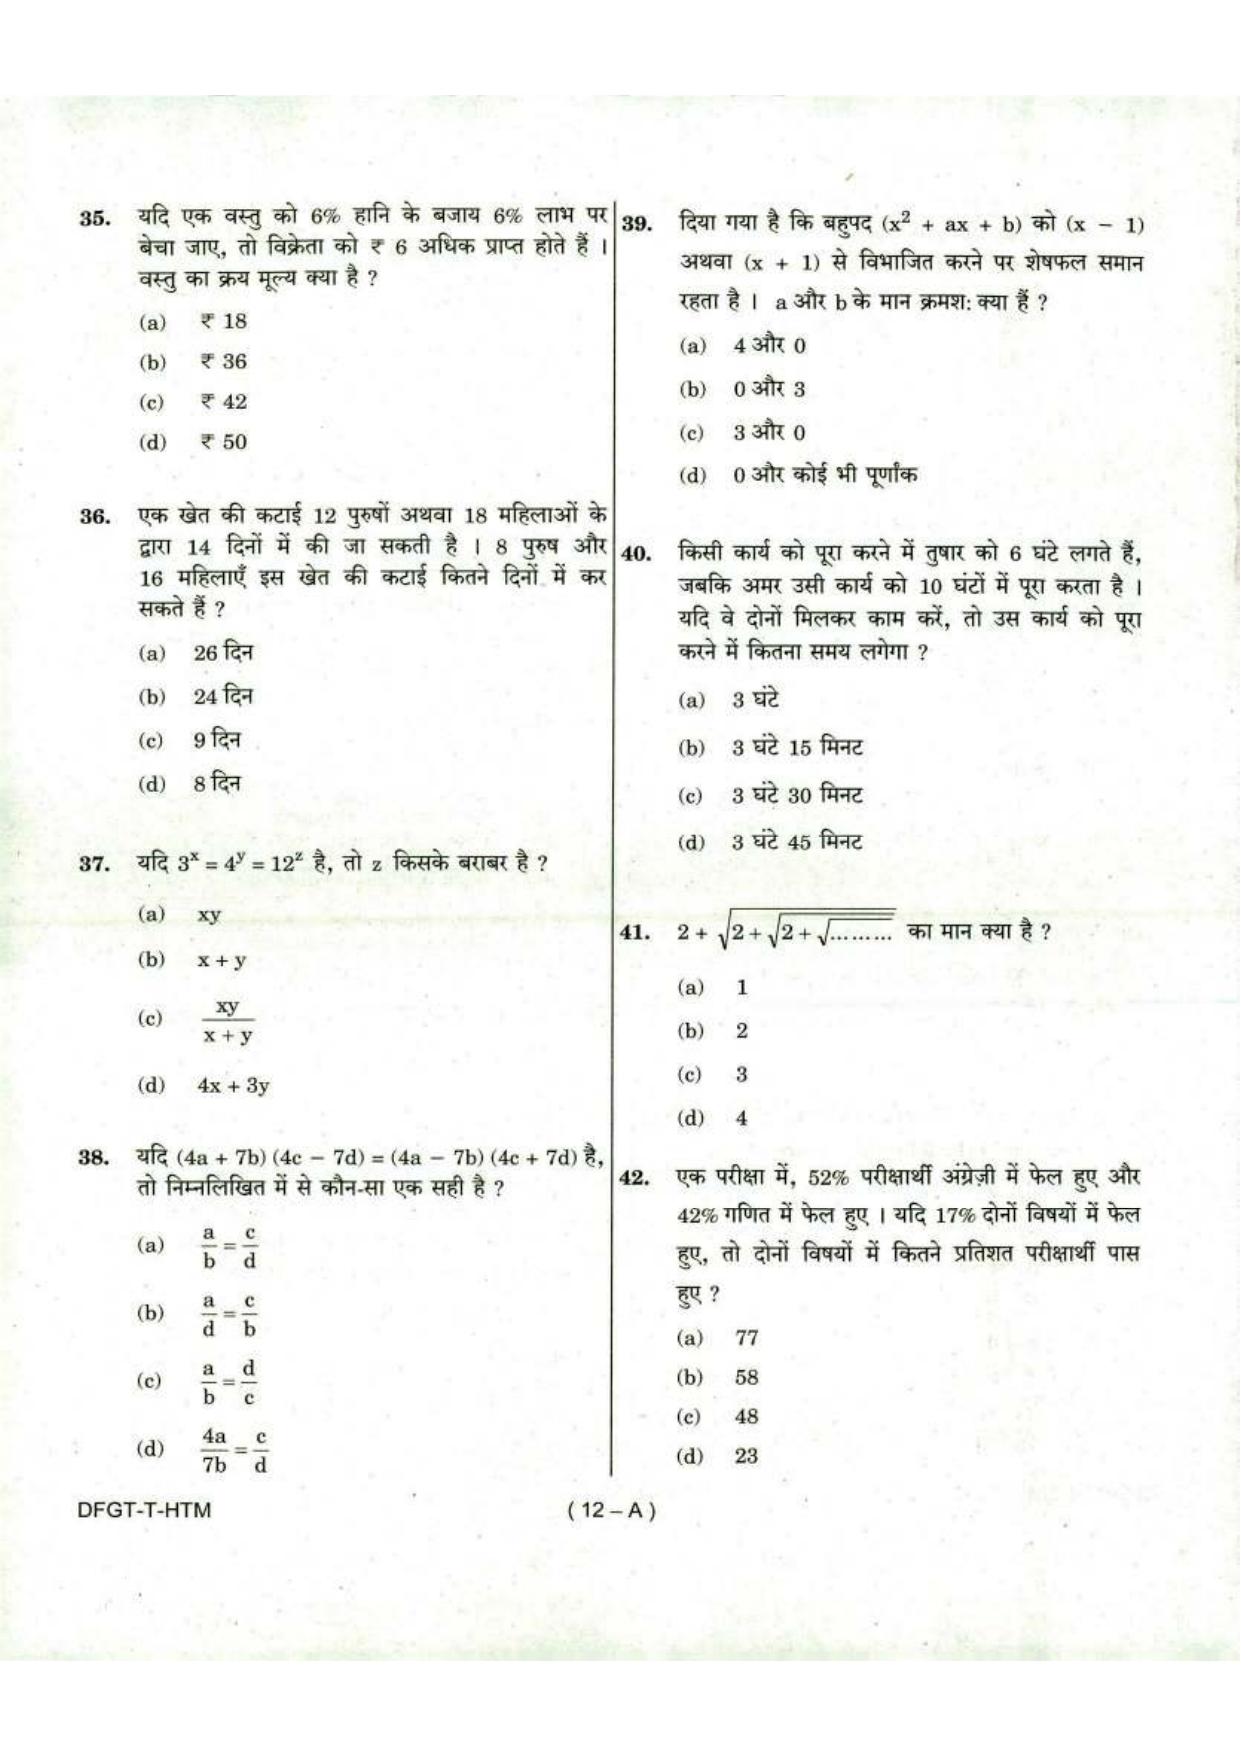 PBSSD Elementary Mathematics Practice Papers For BLS, PADEO & Other Posts - Page 12